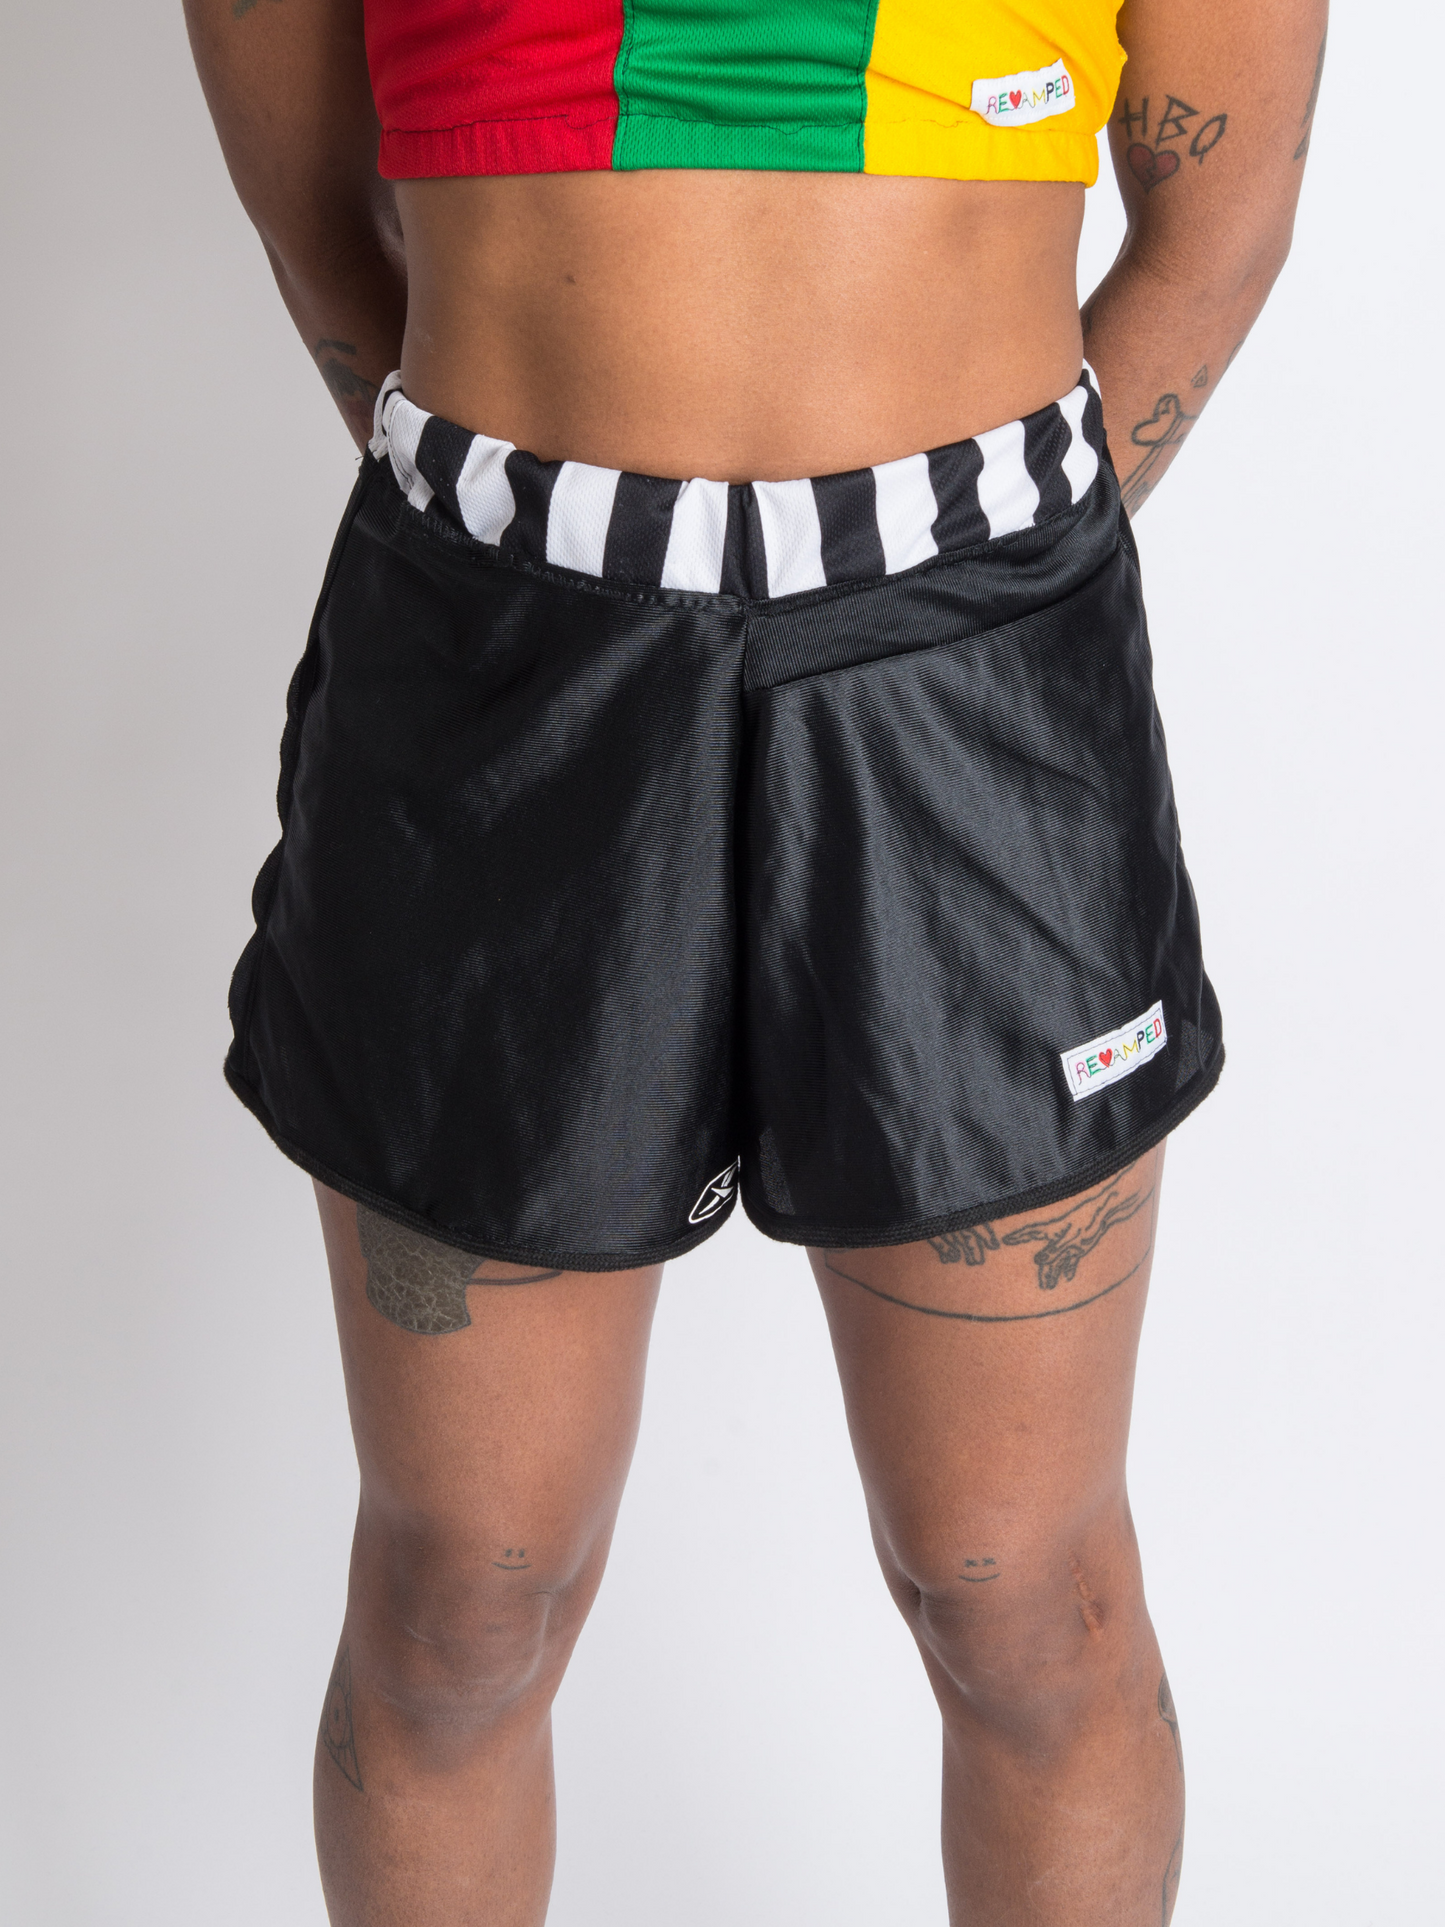 Revamped Clothing Toronto - Repurposed Upcycled Alterations Repairs Parkdale  jersey shorts reebok